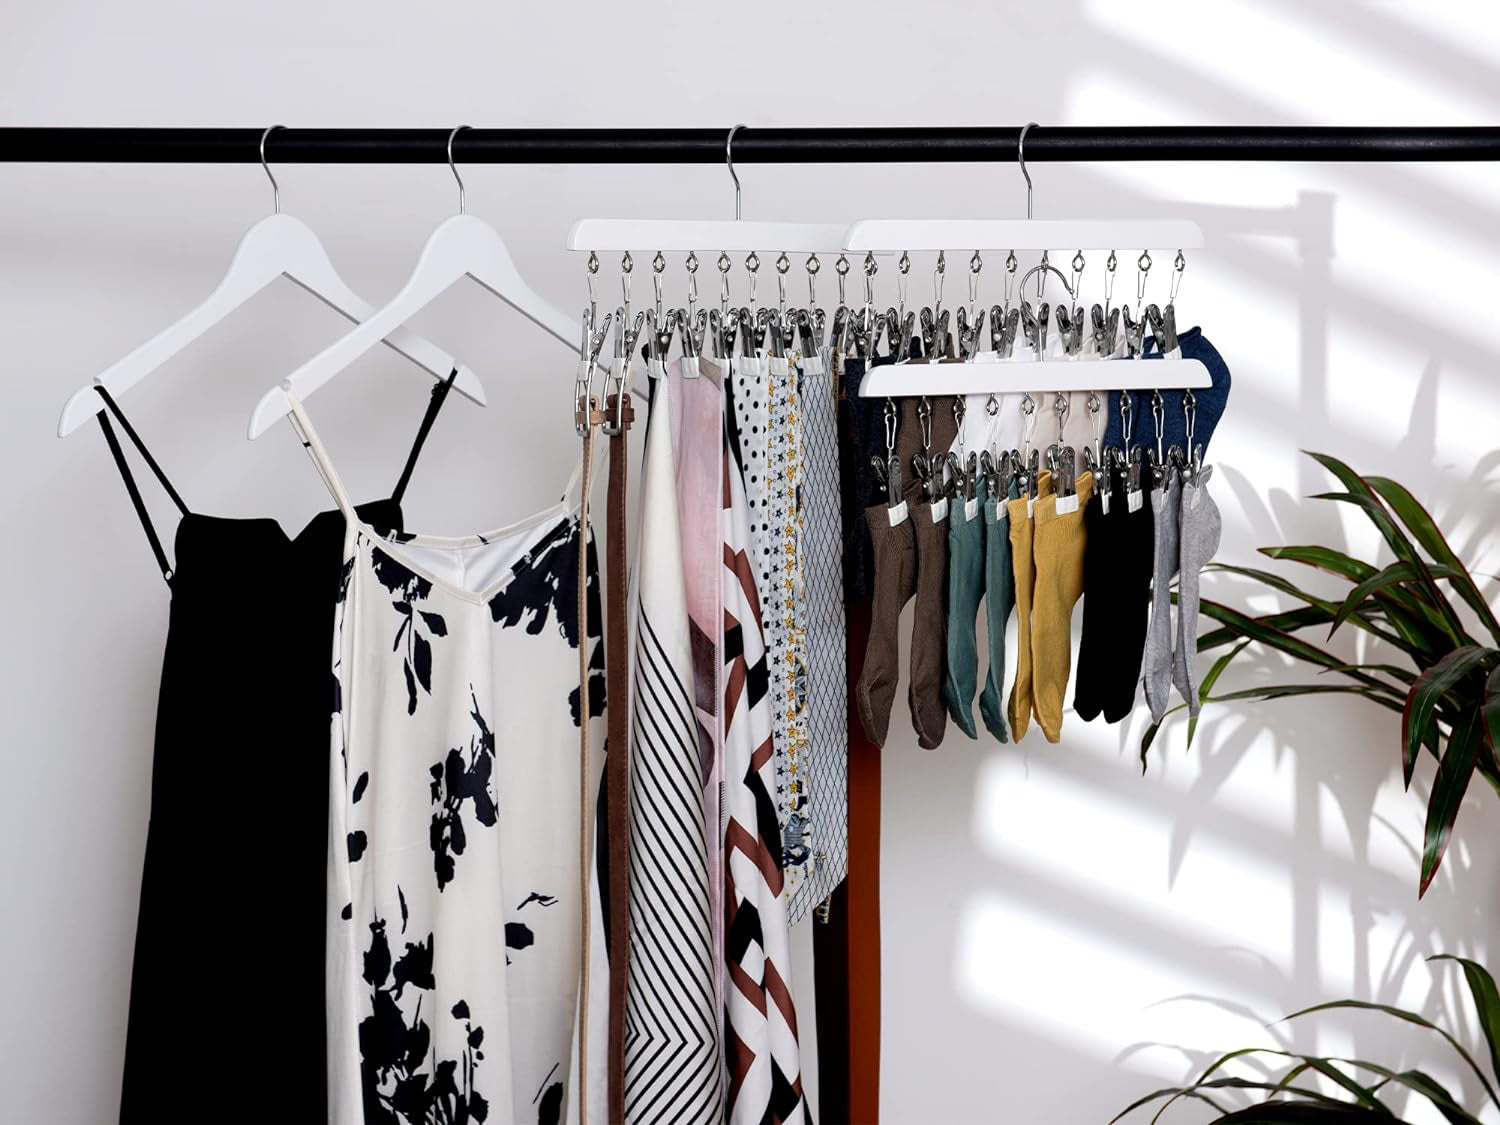 Colorful Wooden Cloth Hangers On Clothes Rail In White Wardrobe